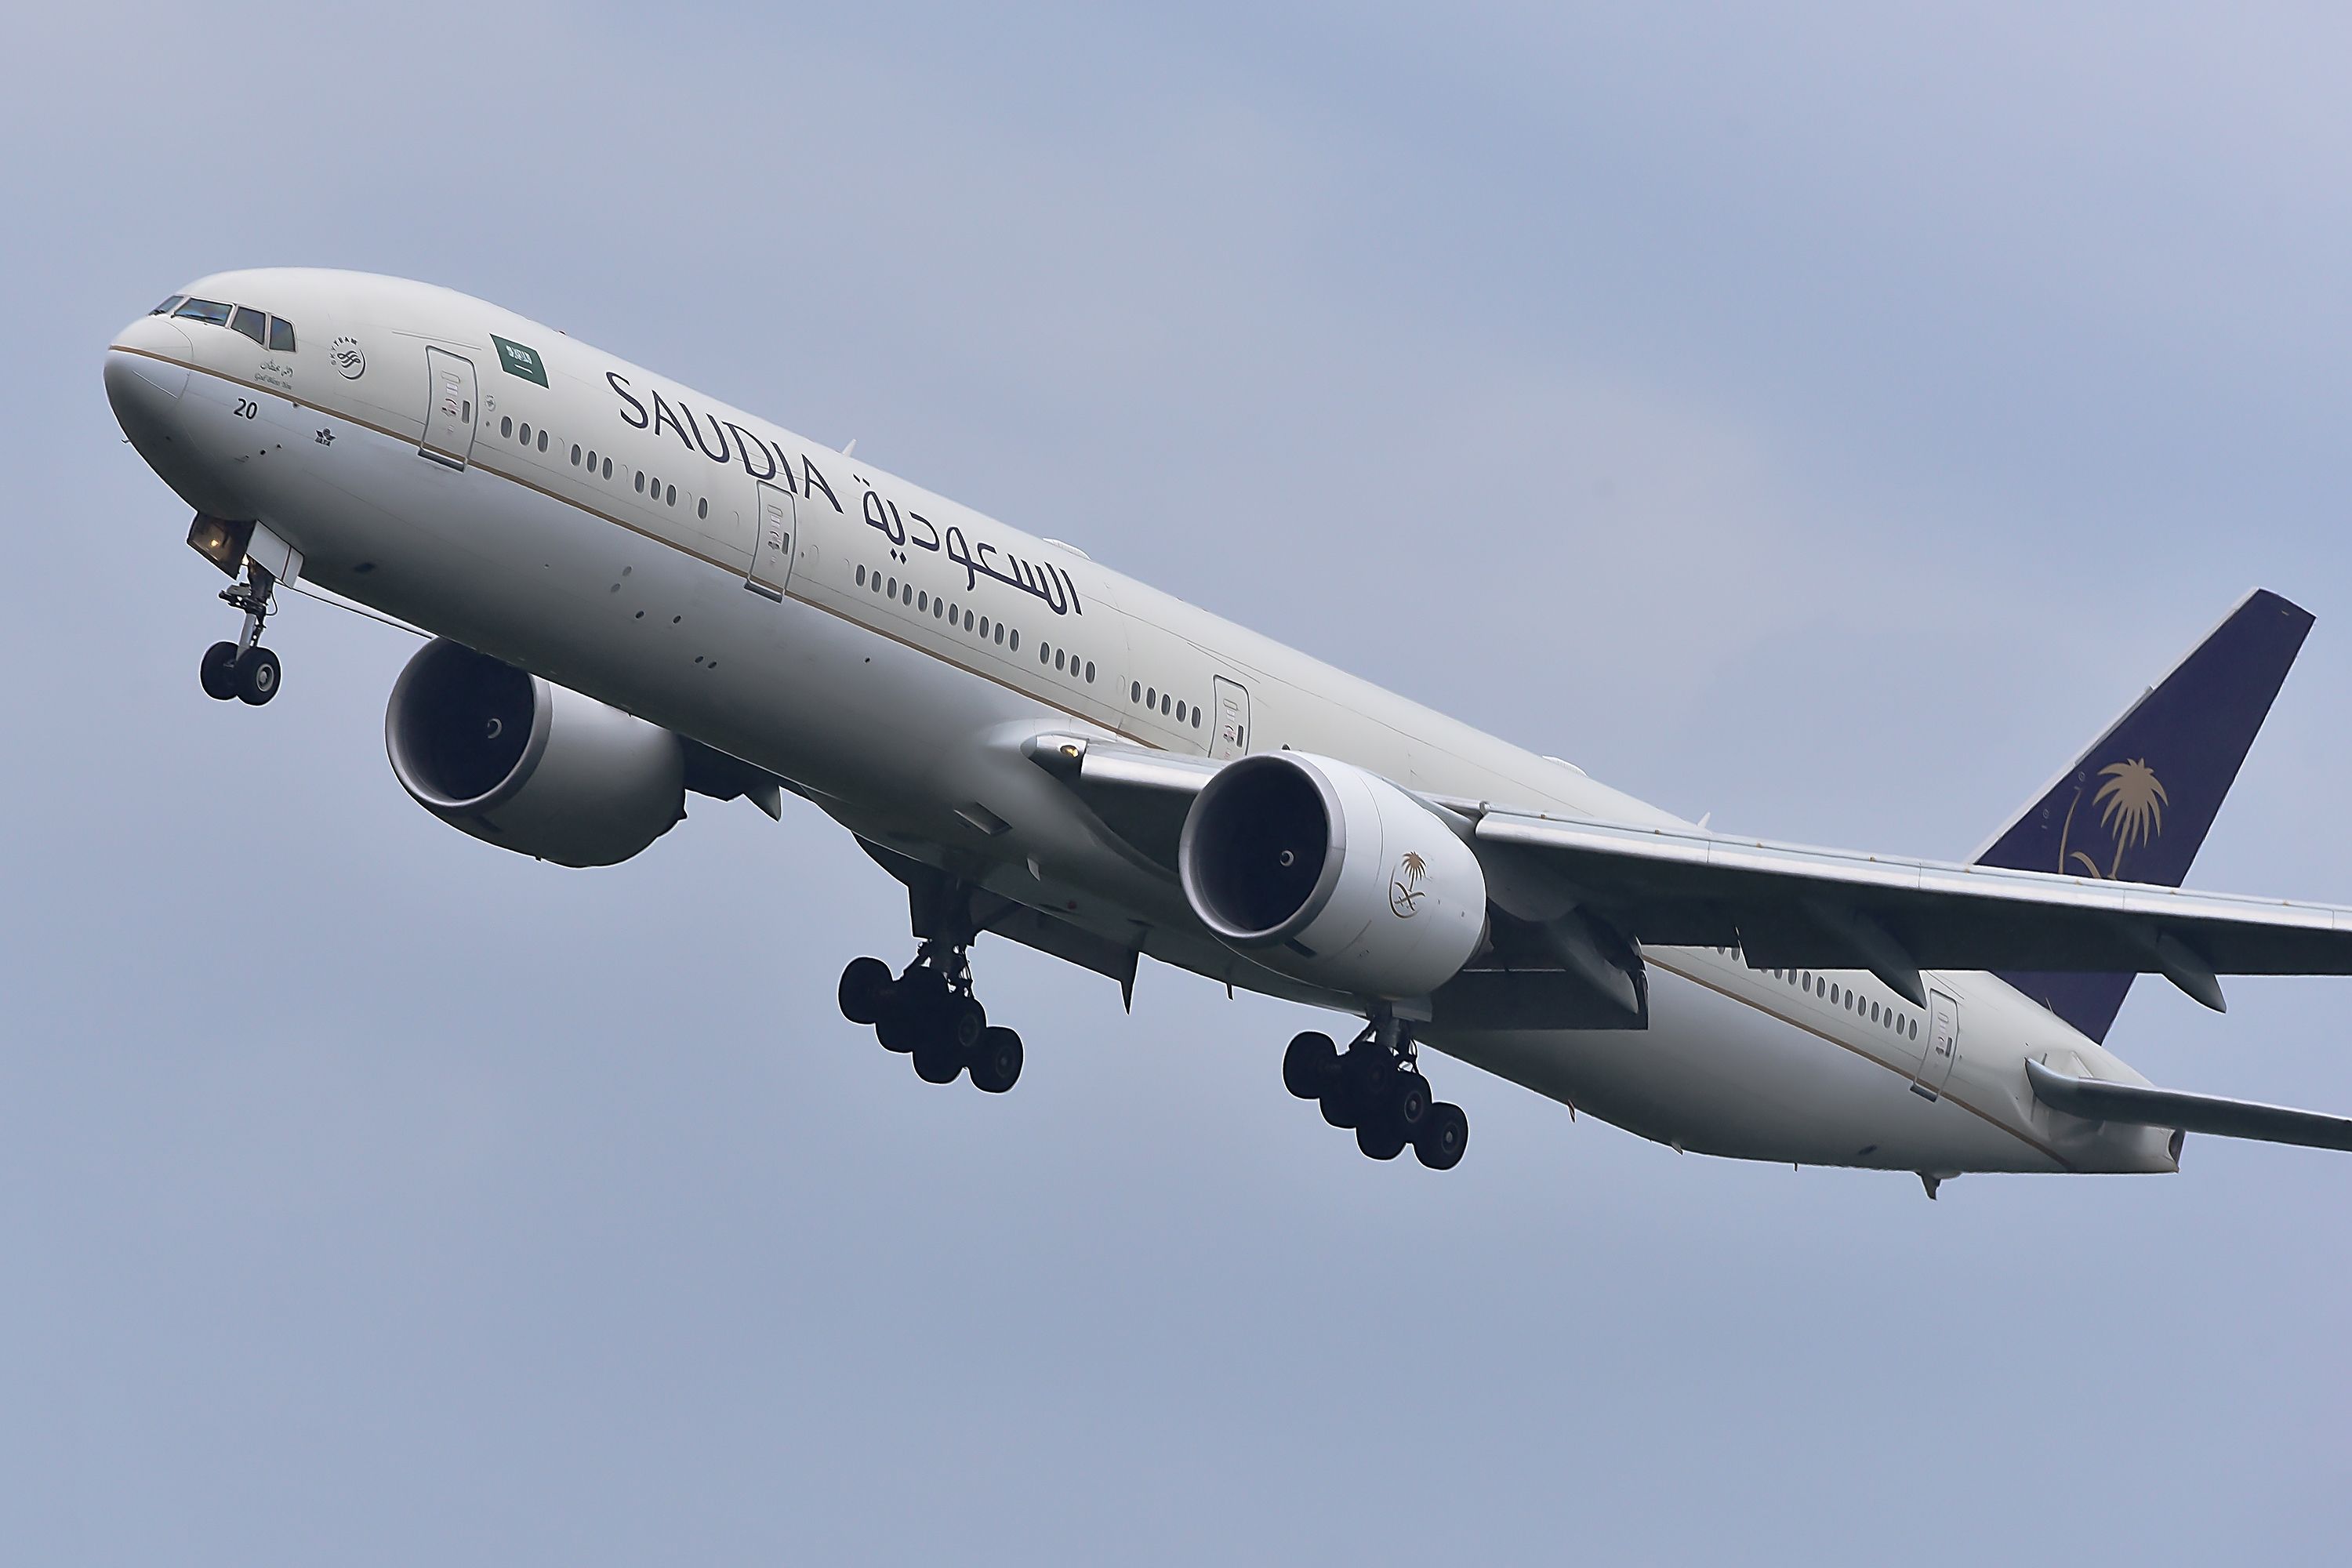 Saudia Boeing 777 over airport.